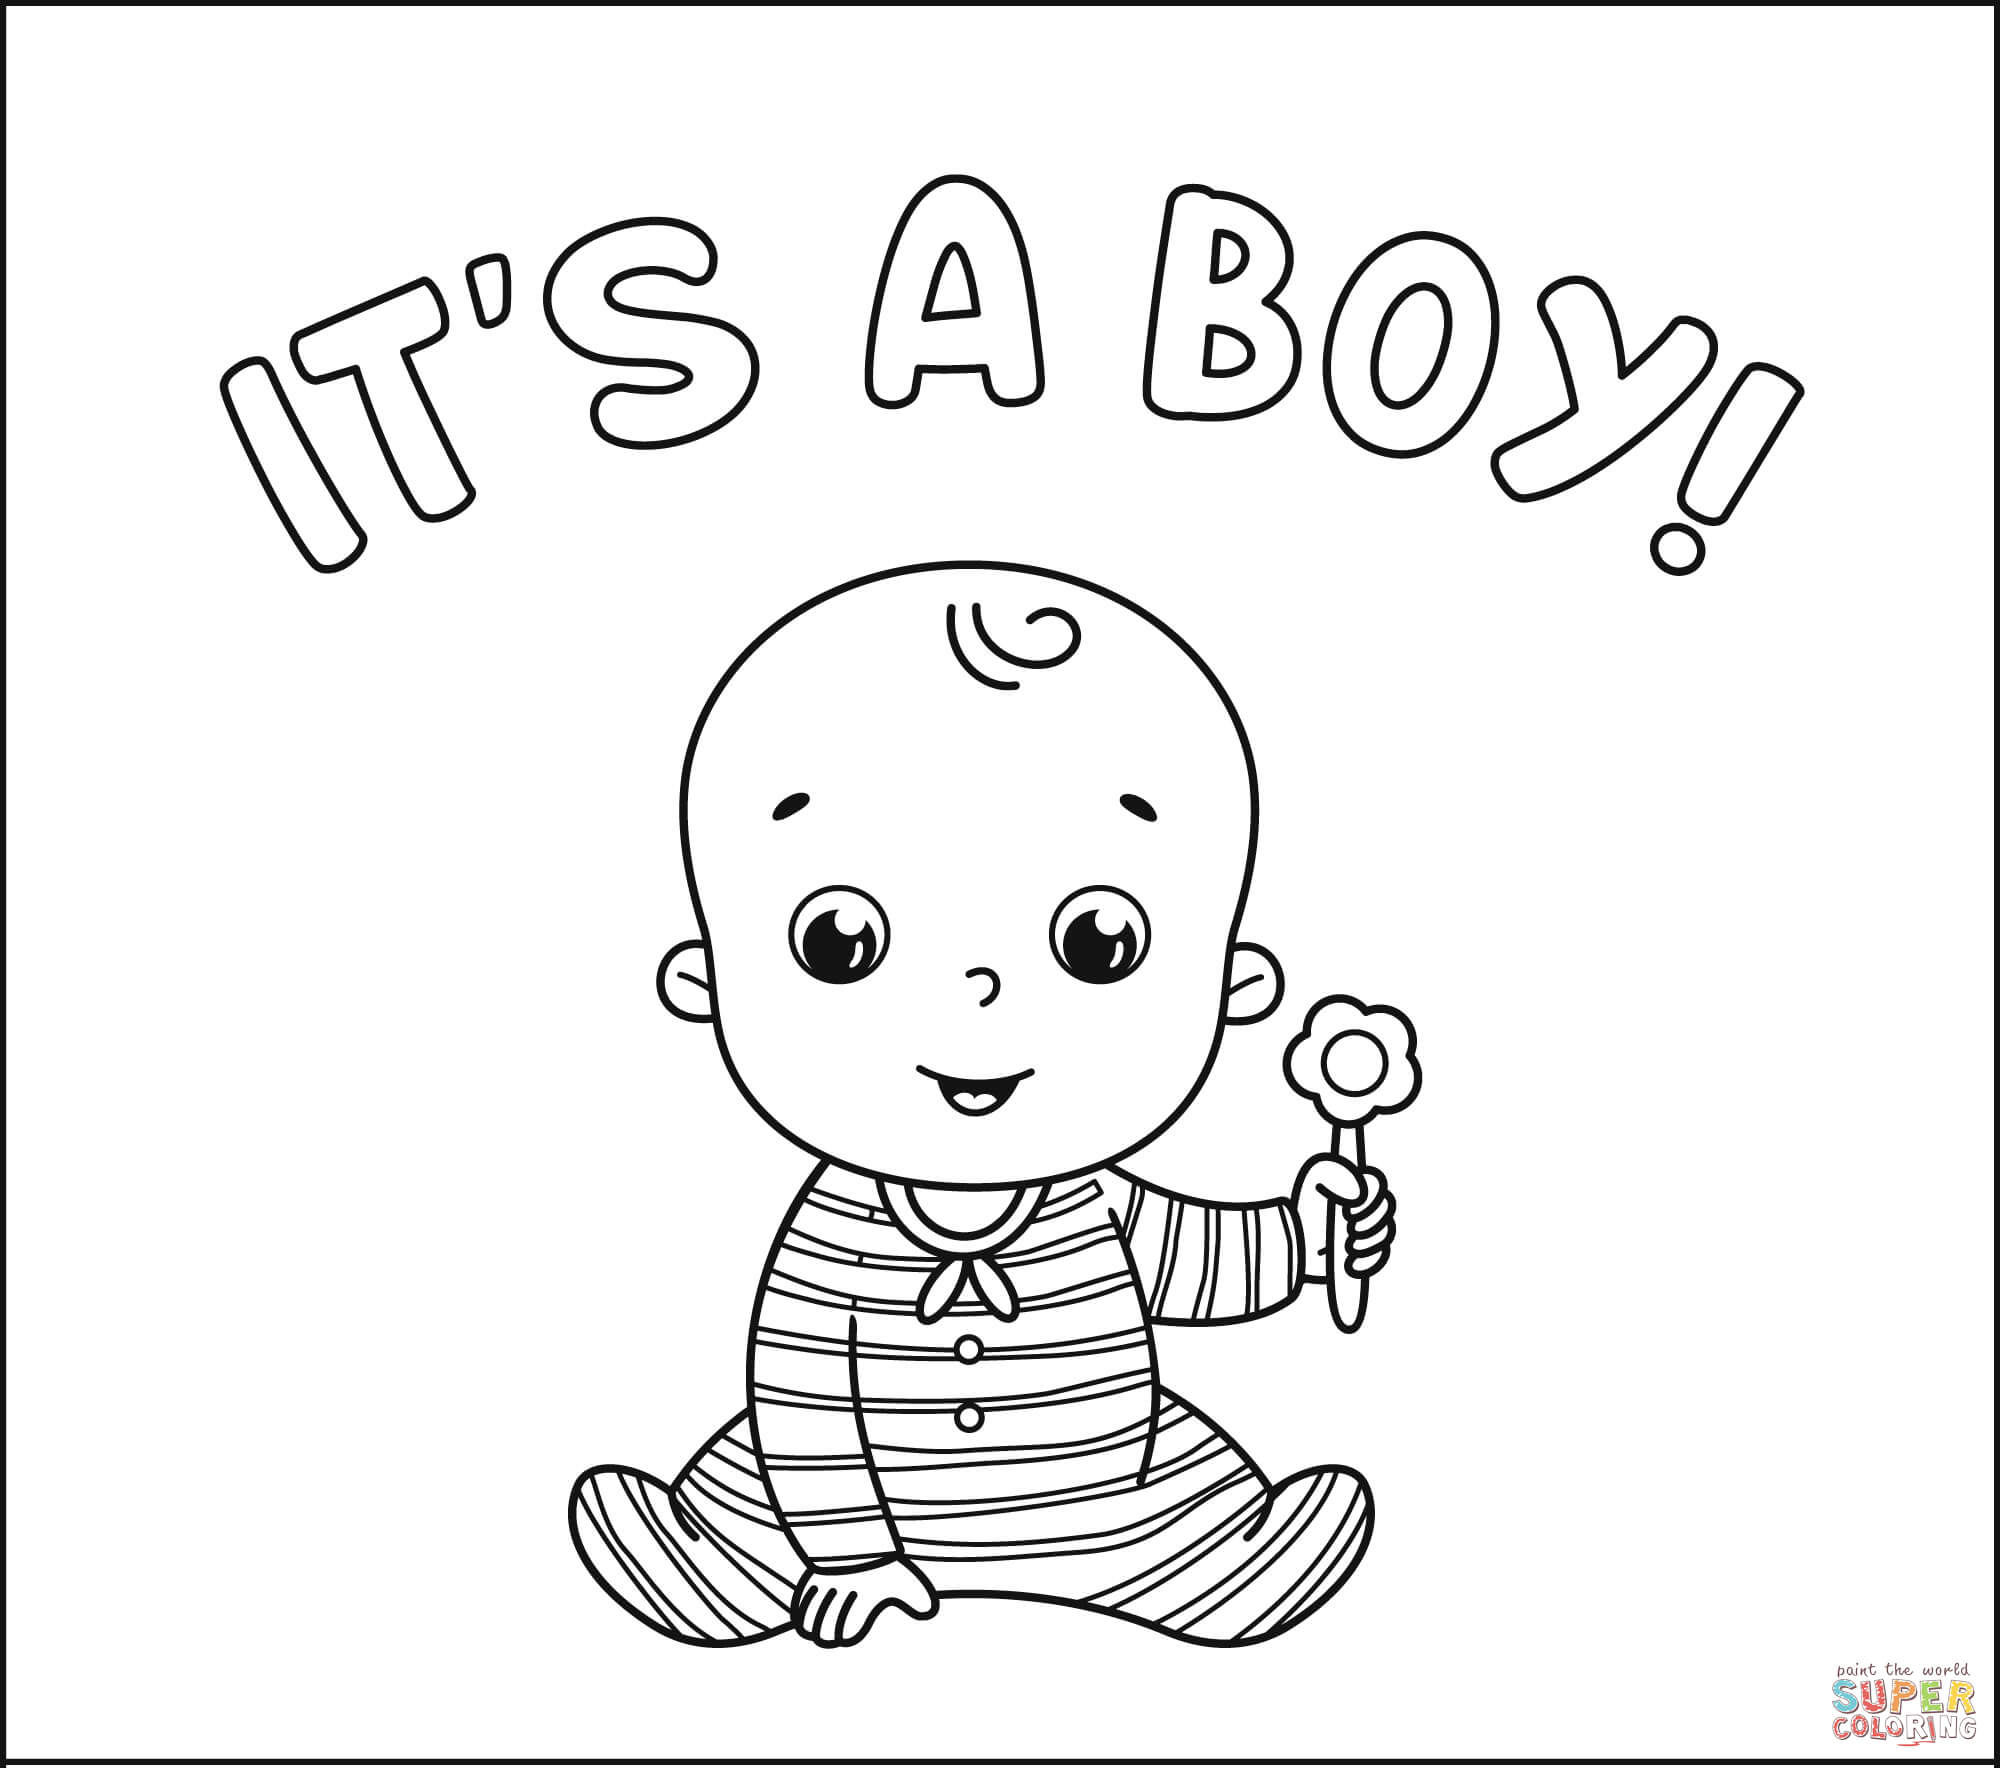 It's a Boy coloring page | Free Printable Coloring Pages